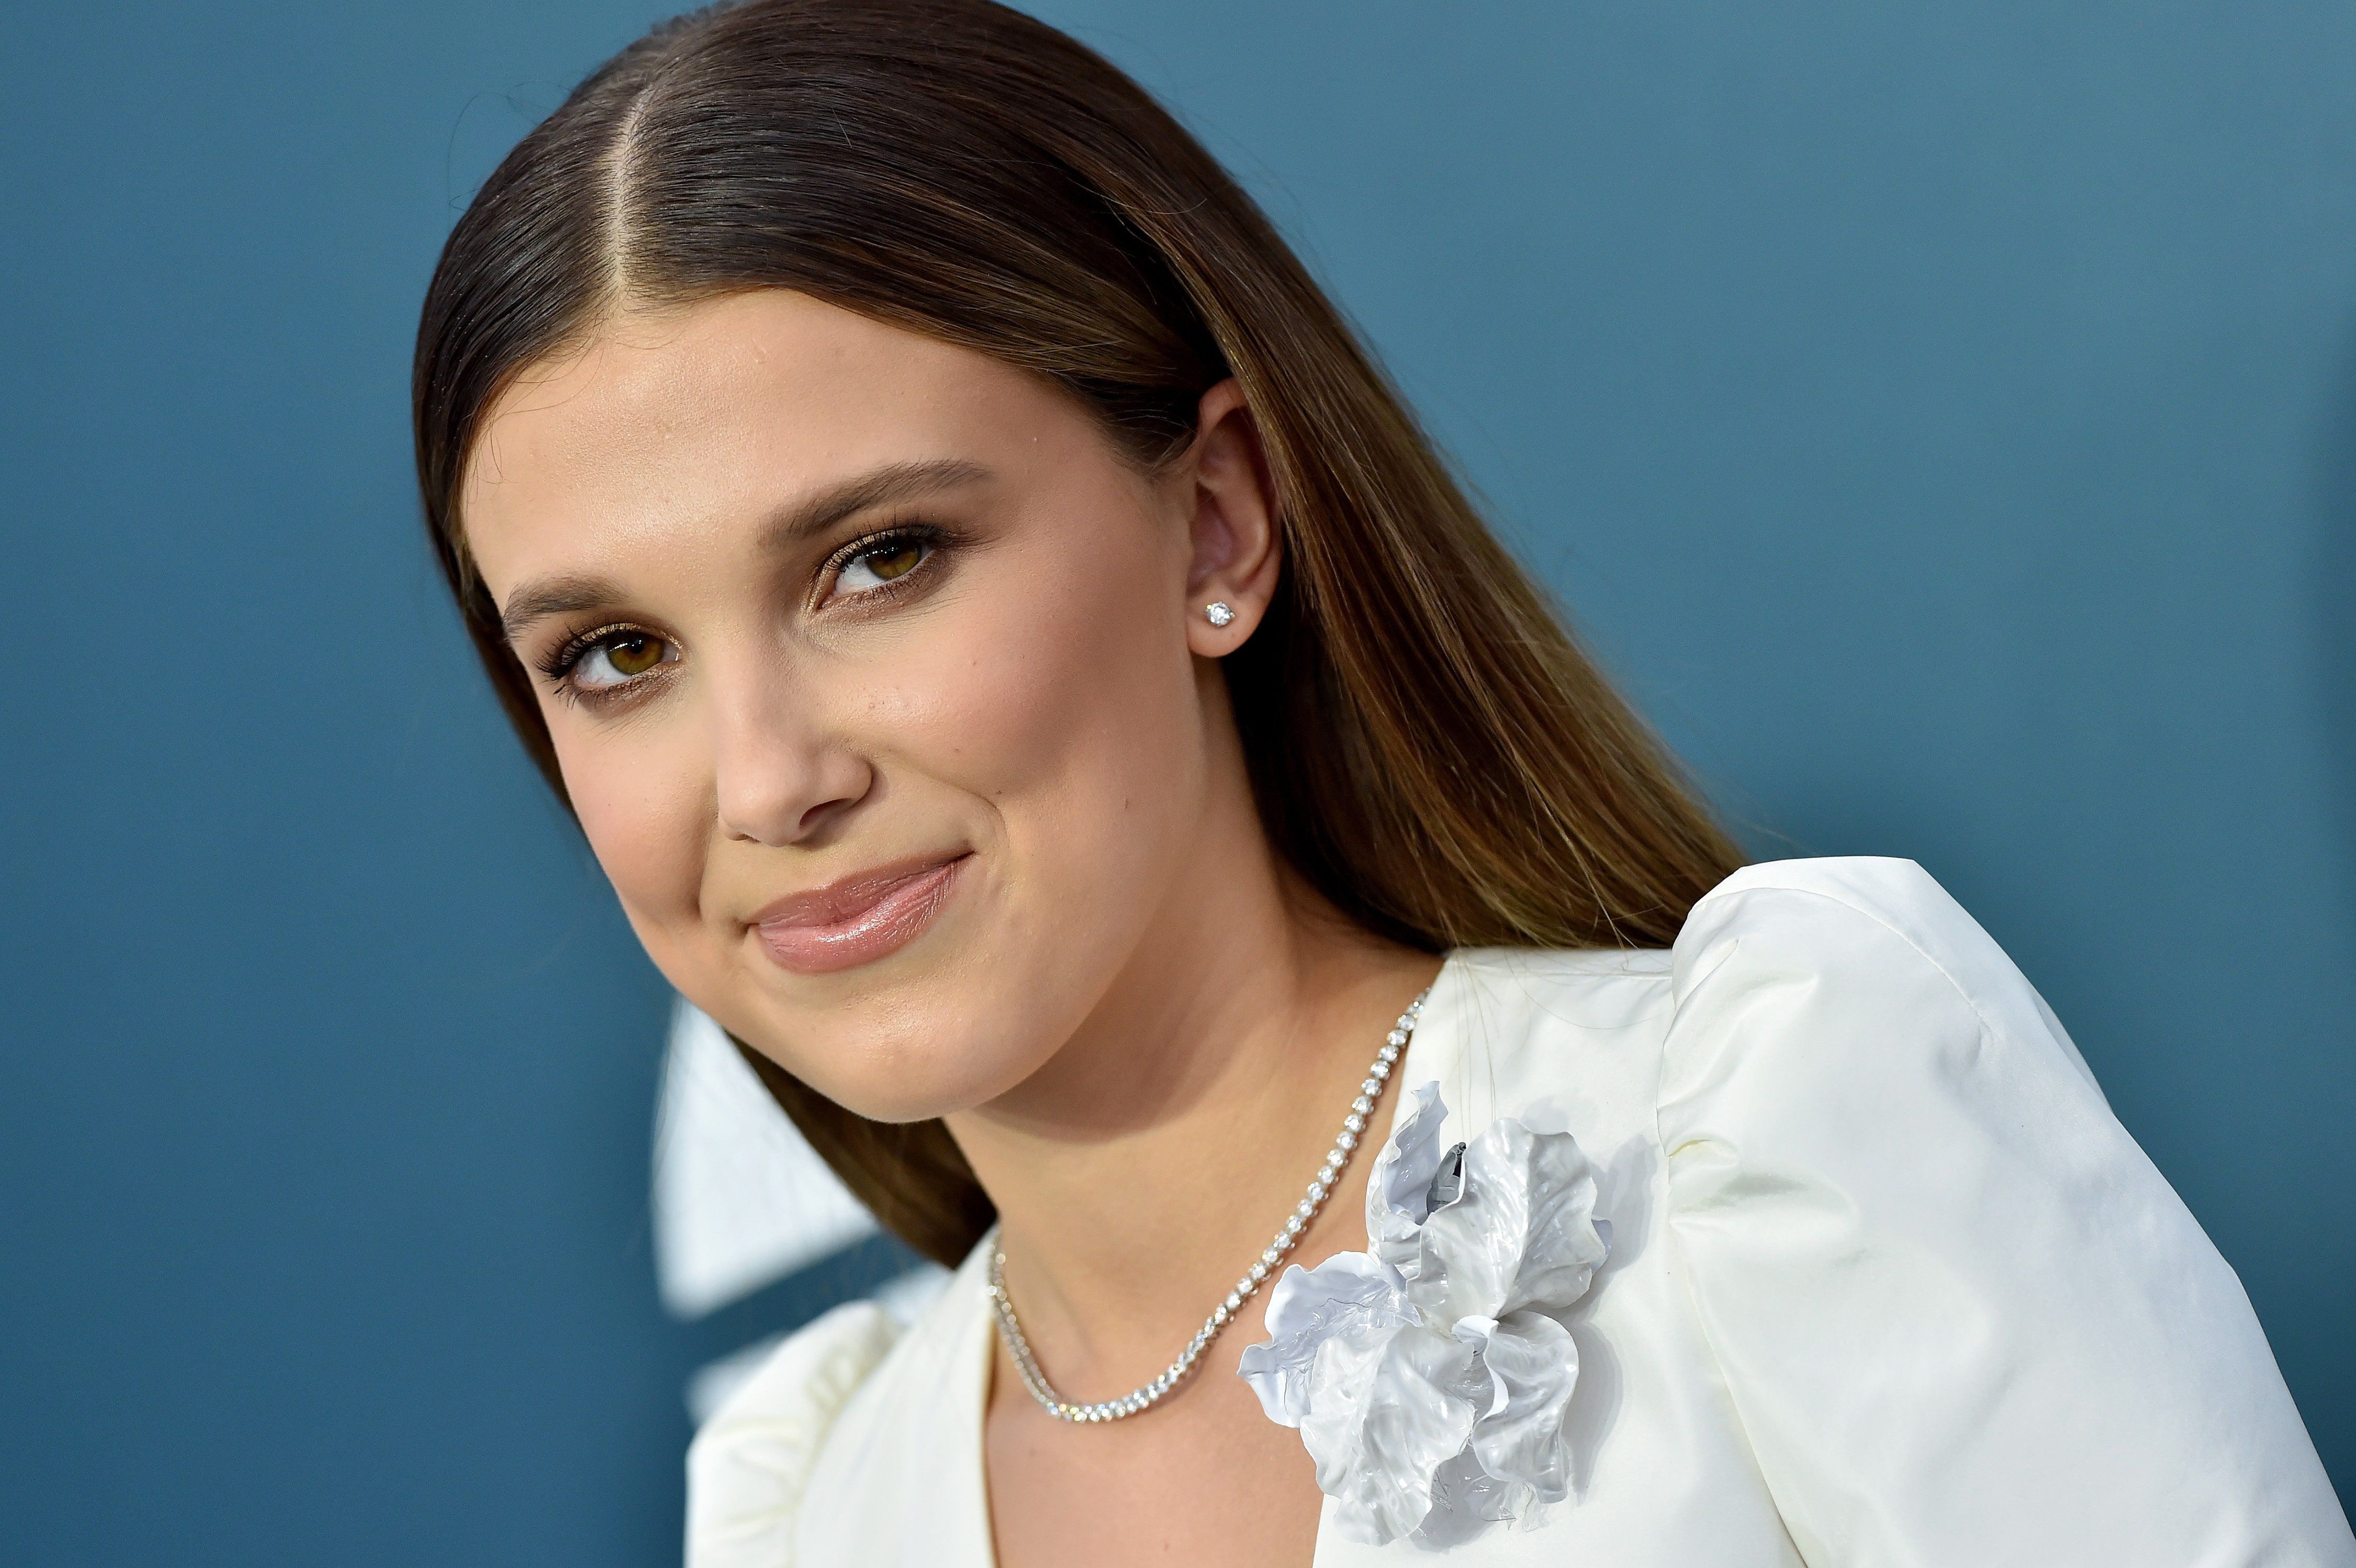 Millie Bobby Brown Said She Gets Frustrated By Online Harassment in Birthday Instagram